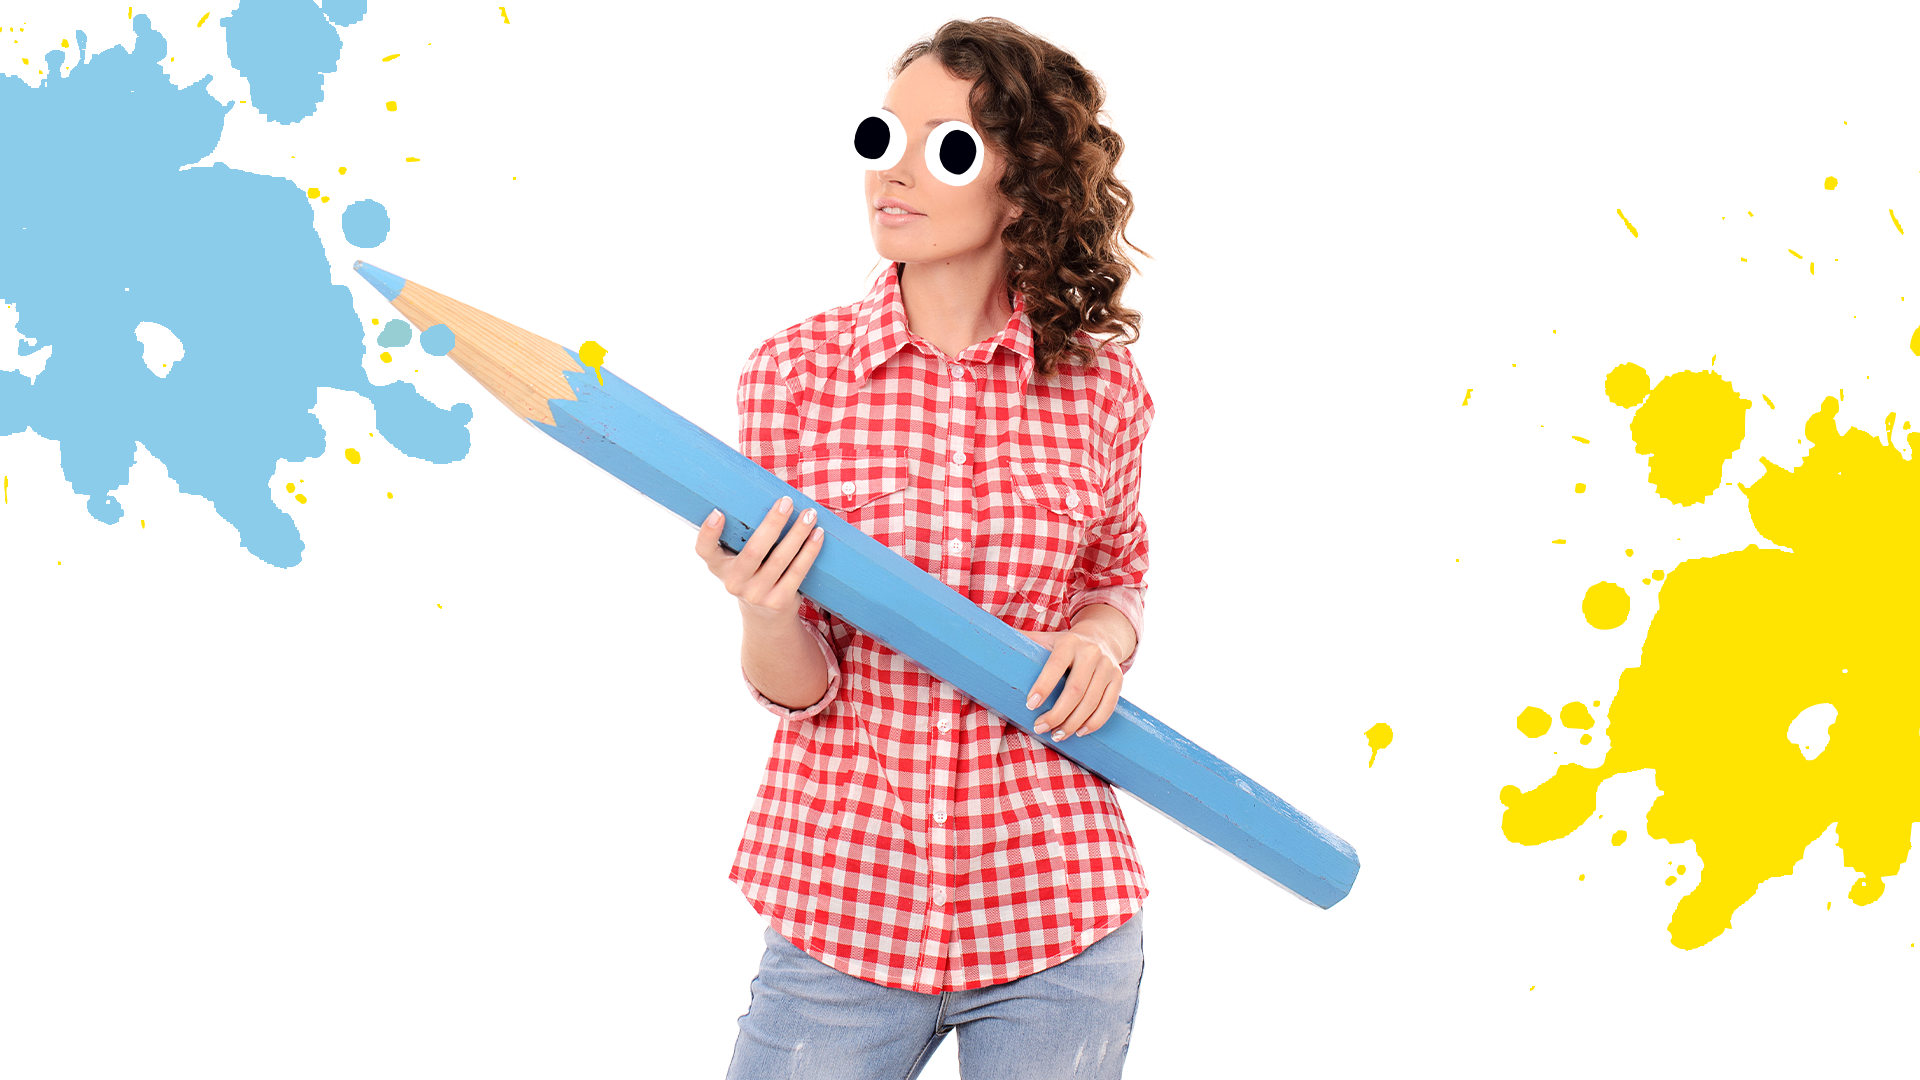 Woman with giant pencil and splats